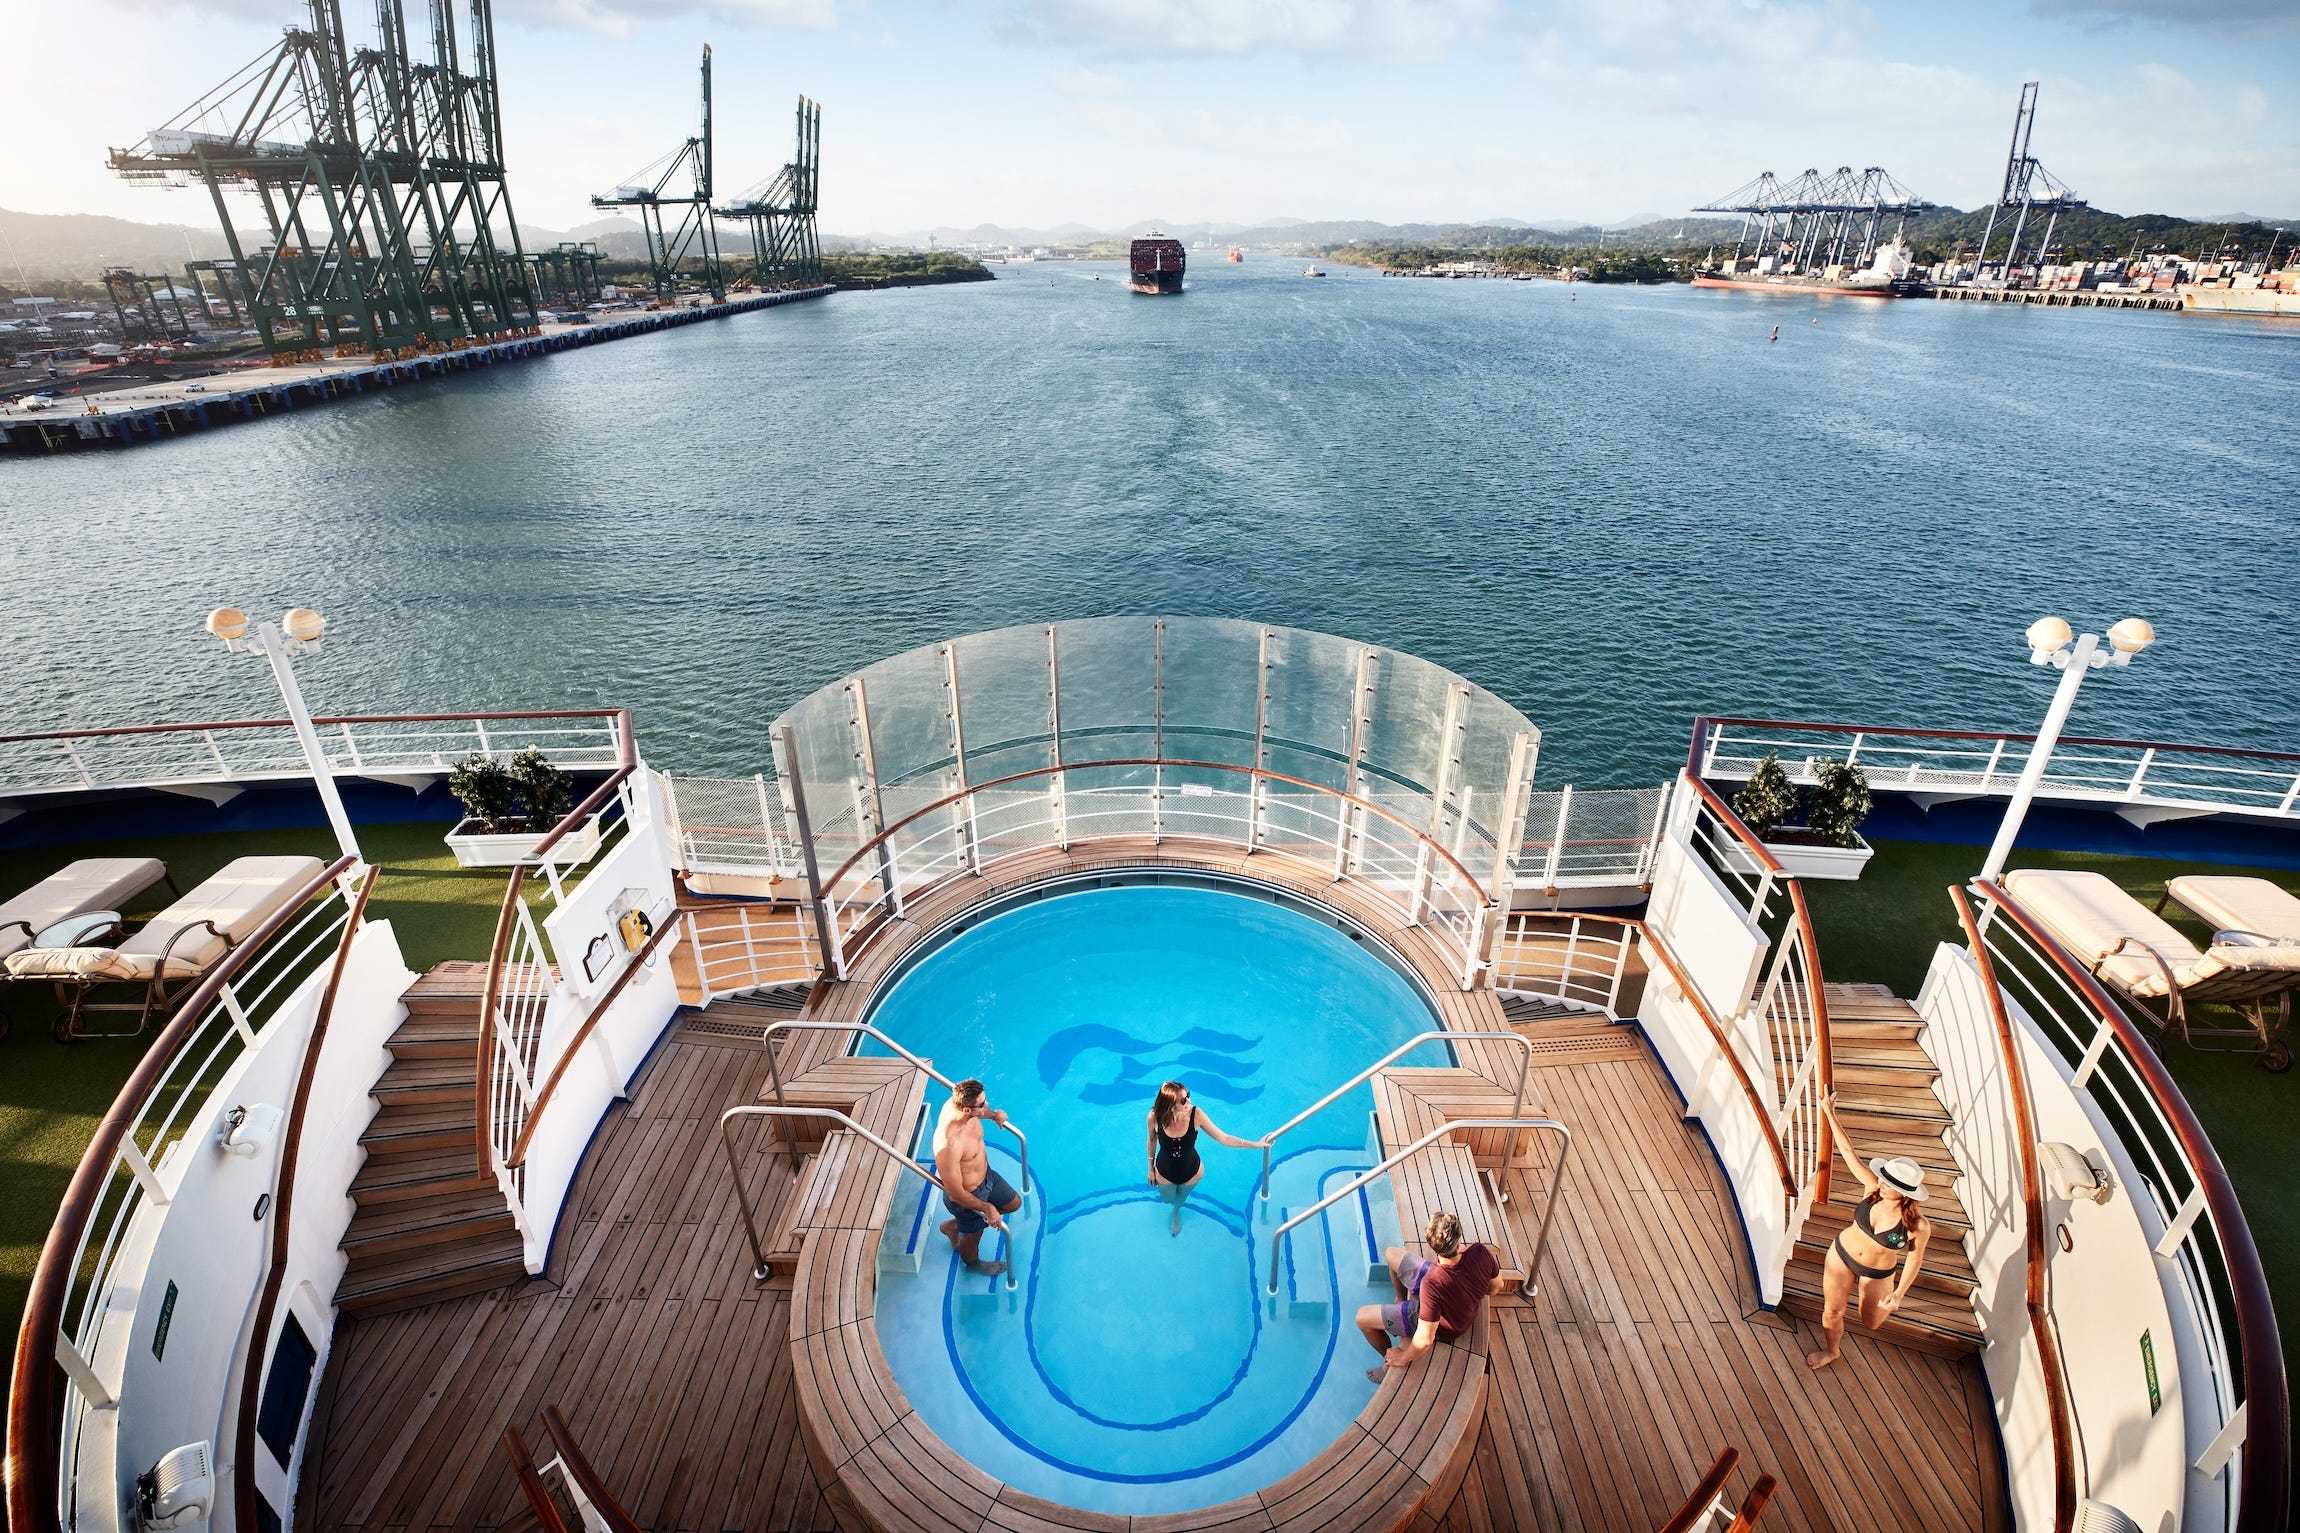 <p>That's a lot of time on the water with no land in sight. Luckily, travelers can keep themselves entertained by attending lectures and programs related to the destinations, leisuring around the adult-only lounge, or taking a dip in Coral Princess' four pools. </p><p>The 21-year-old ship also has 10 places to grab a bite, although the Italian and steakhouse restaurants are considered specialty. Premier is the cruise line's most inclusive package, but it only includes 16 free dinners at these upcharge restaurants, paced once a week.</p><p>Princess is still a mass-market cruise line, after all.</p>